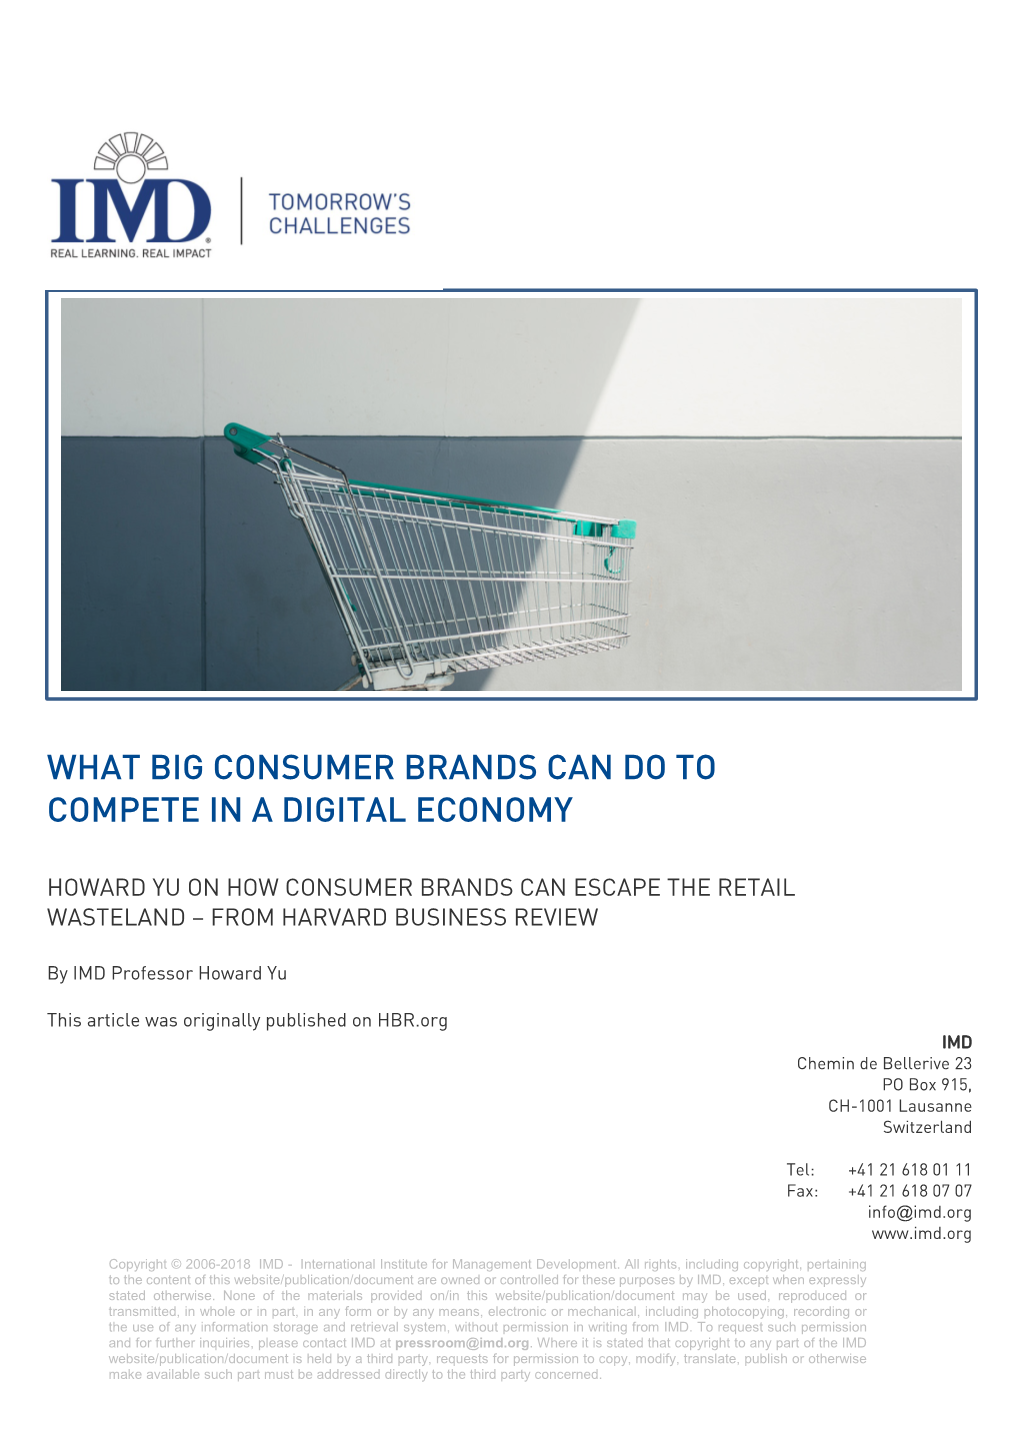 What Big Consumer Brands Can Do to Compete in a Digital Economy